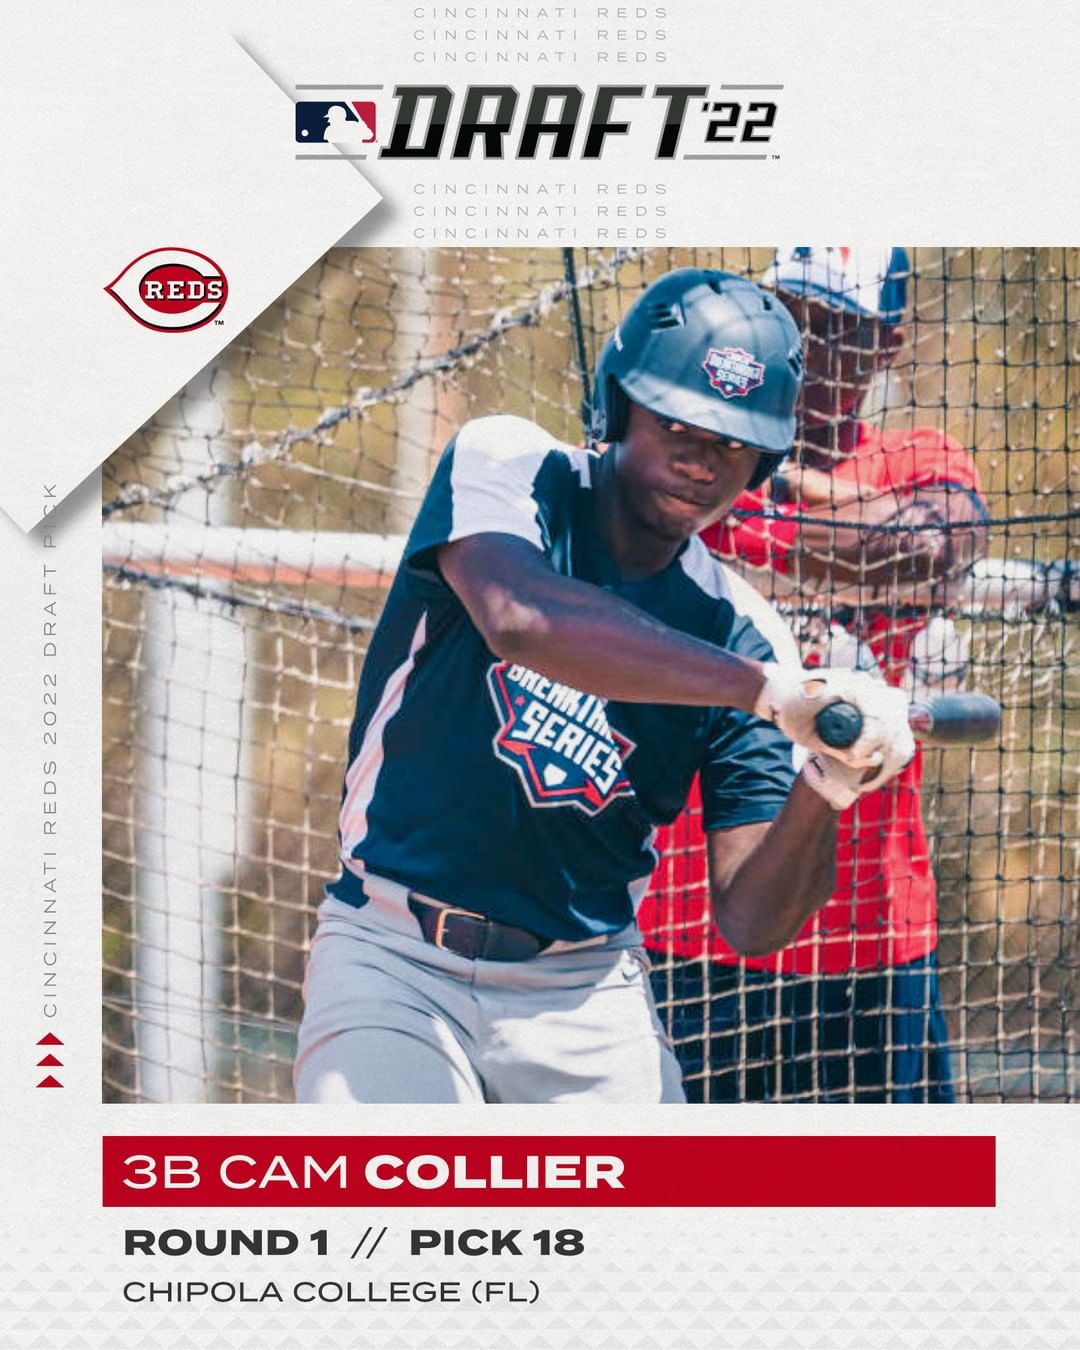 With the 18th pick in the 2022 #MLBDraft, the Cincinnati Reds select 3B Cam Coll...